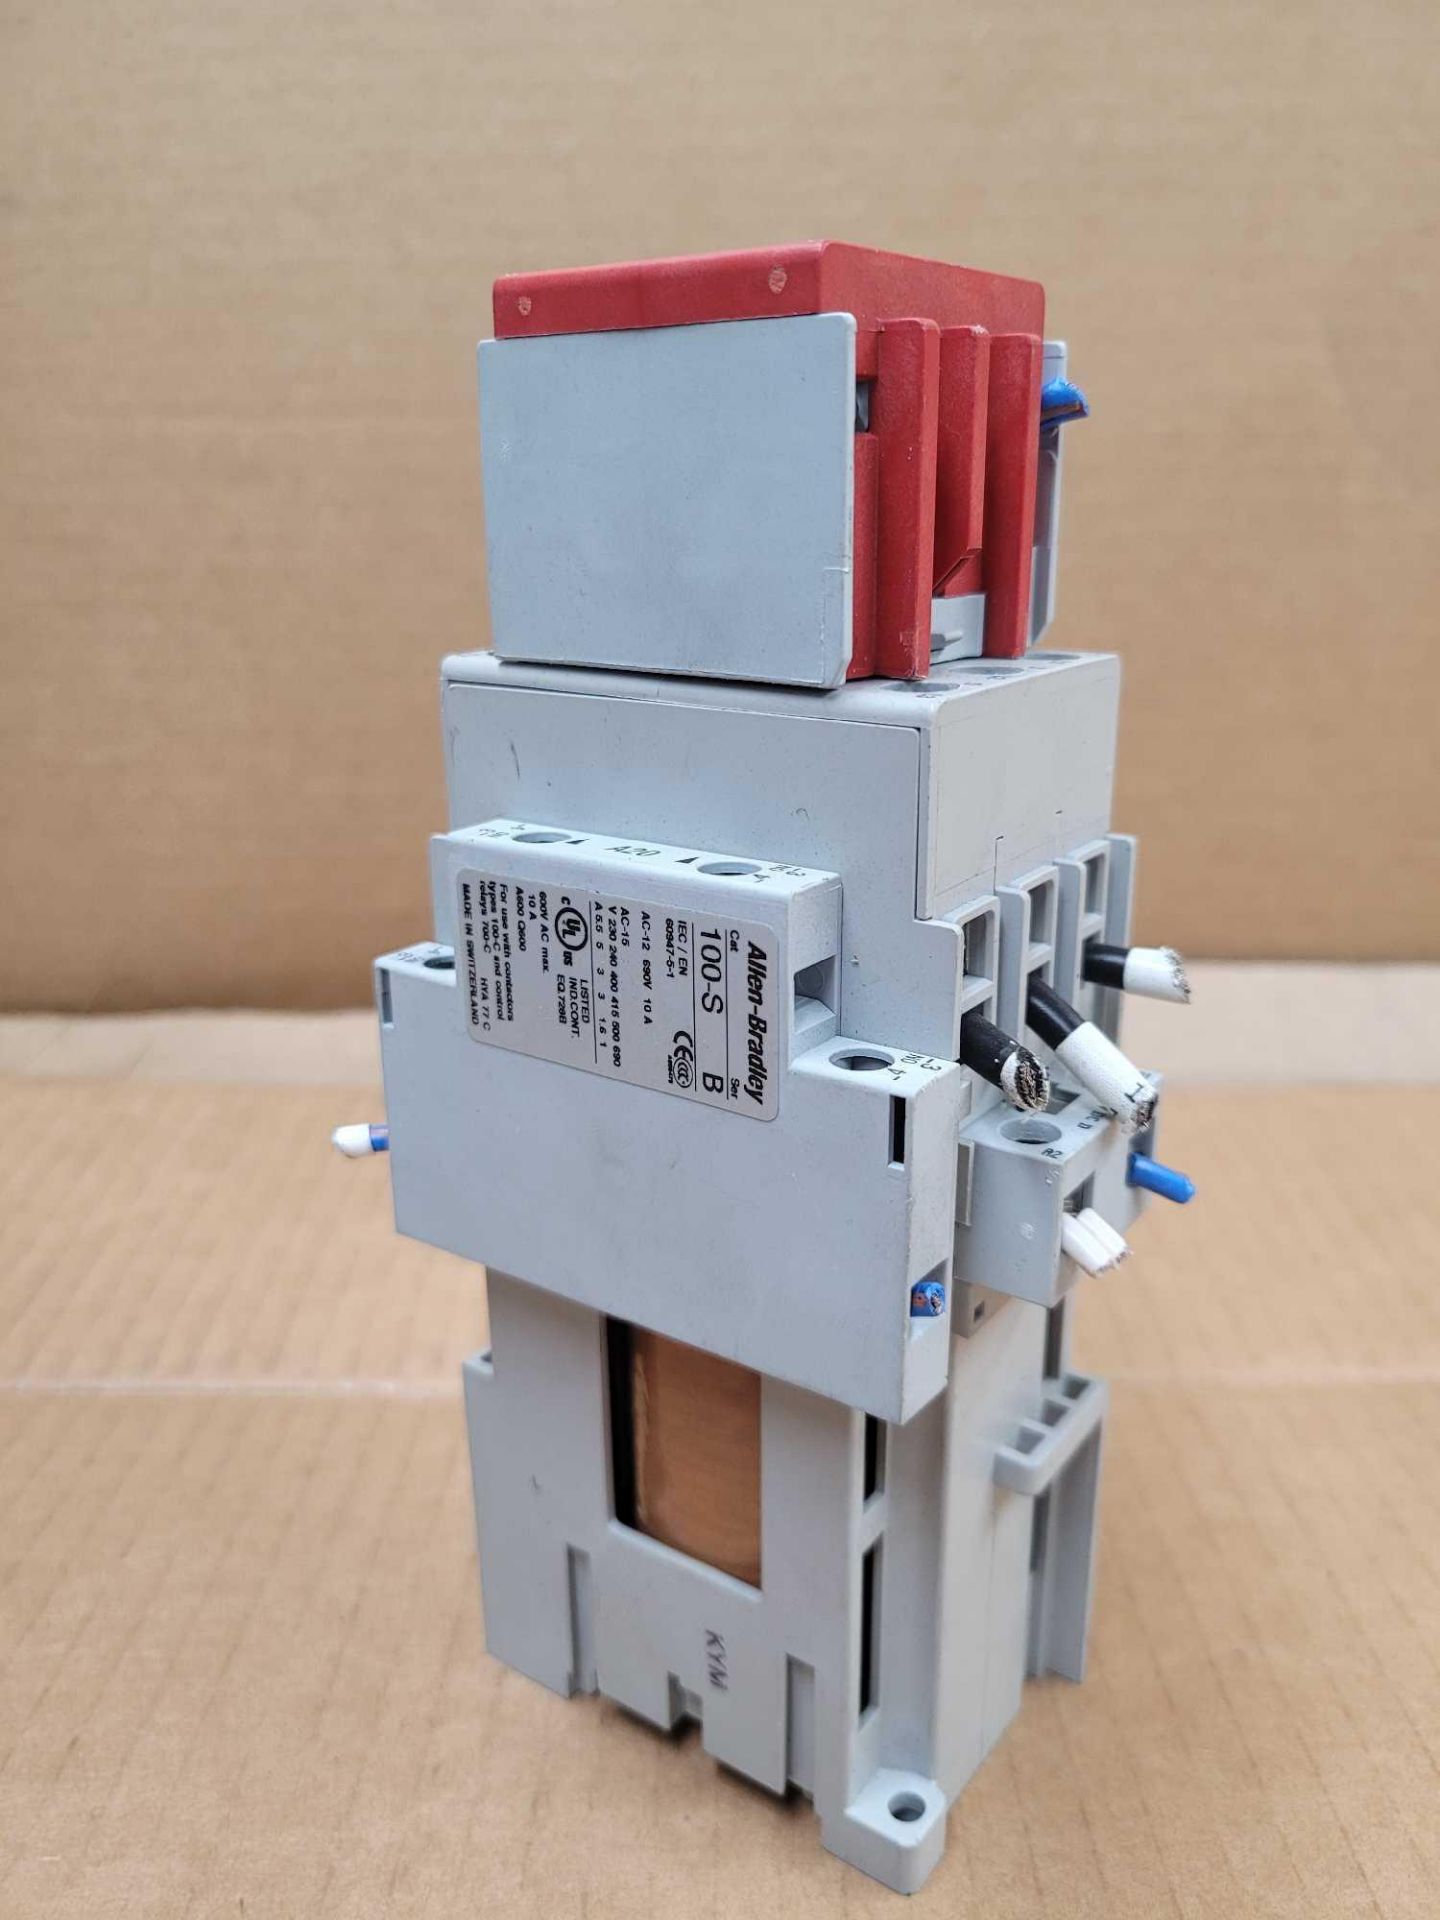 LOT OF 5 ALLEN BRADLEY 100S-C37DJ14BC / Series C Guardmaster Safety Contactor  /  Lot Weight: 10.6 l - Image 4 of 9